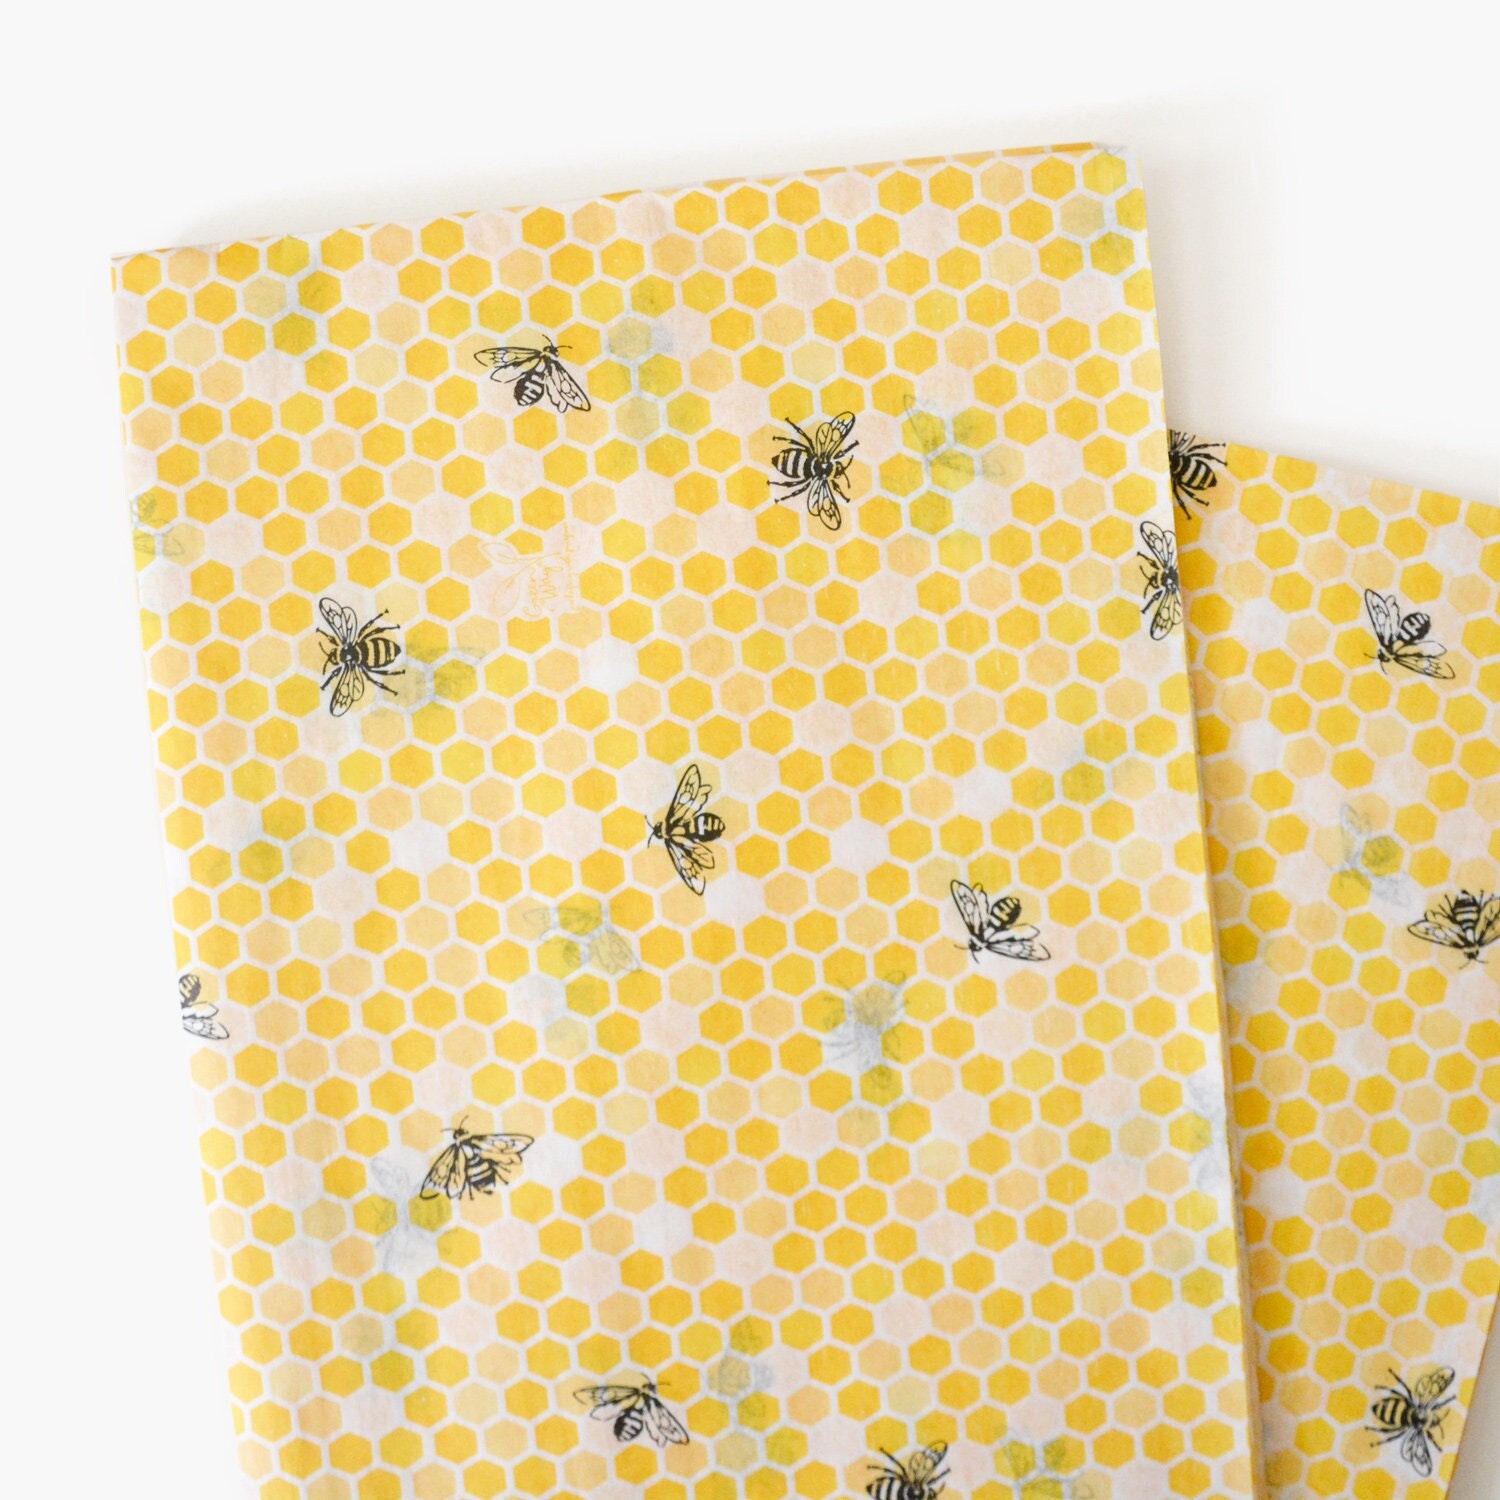 Bee and flower wrapping paper. Cowslip wrapping paper. Bee wrapping paper.  wrapping paper. Beegift. Bee present. Bluebells and bees